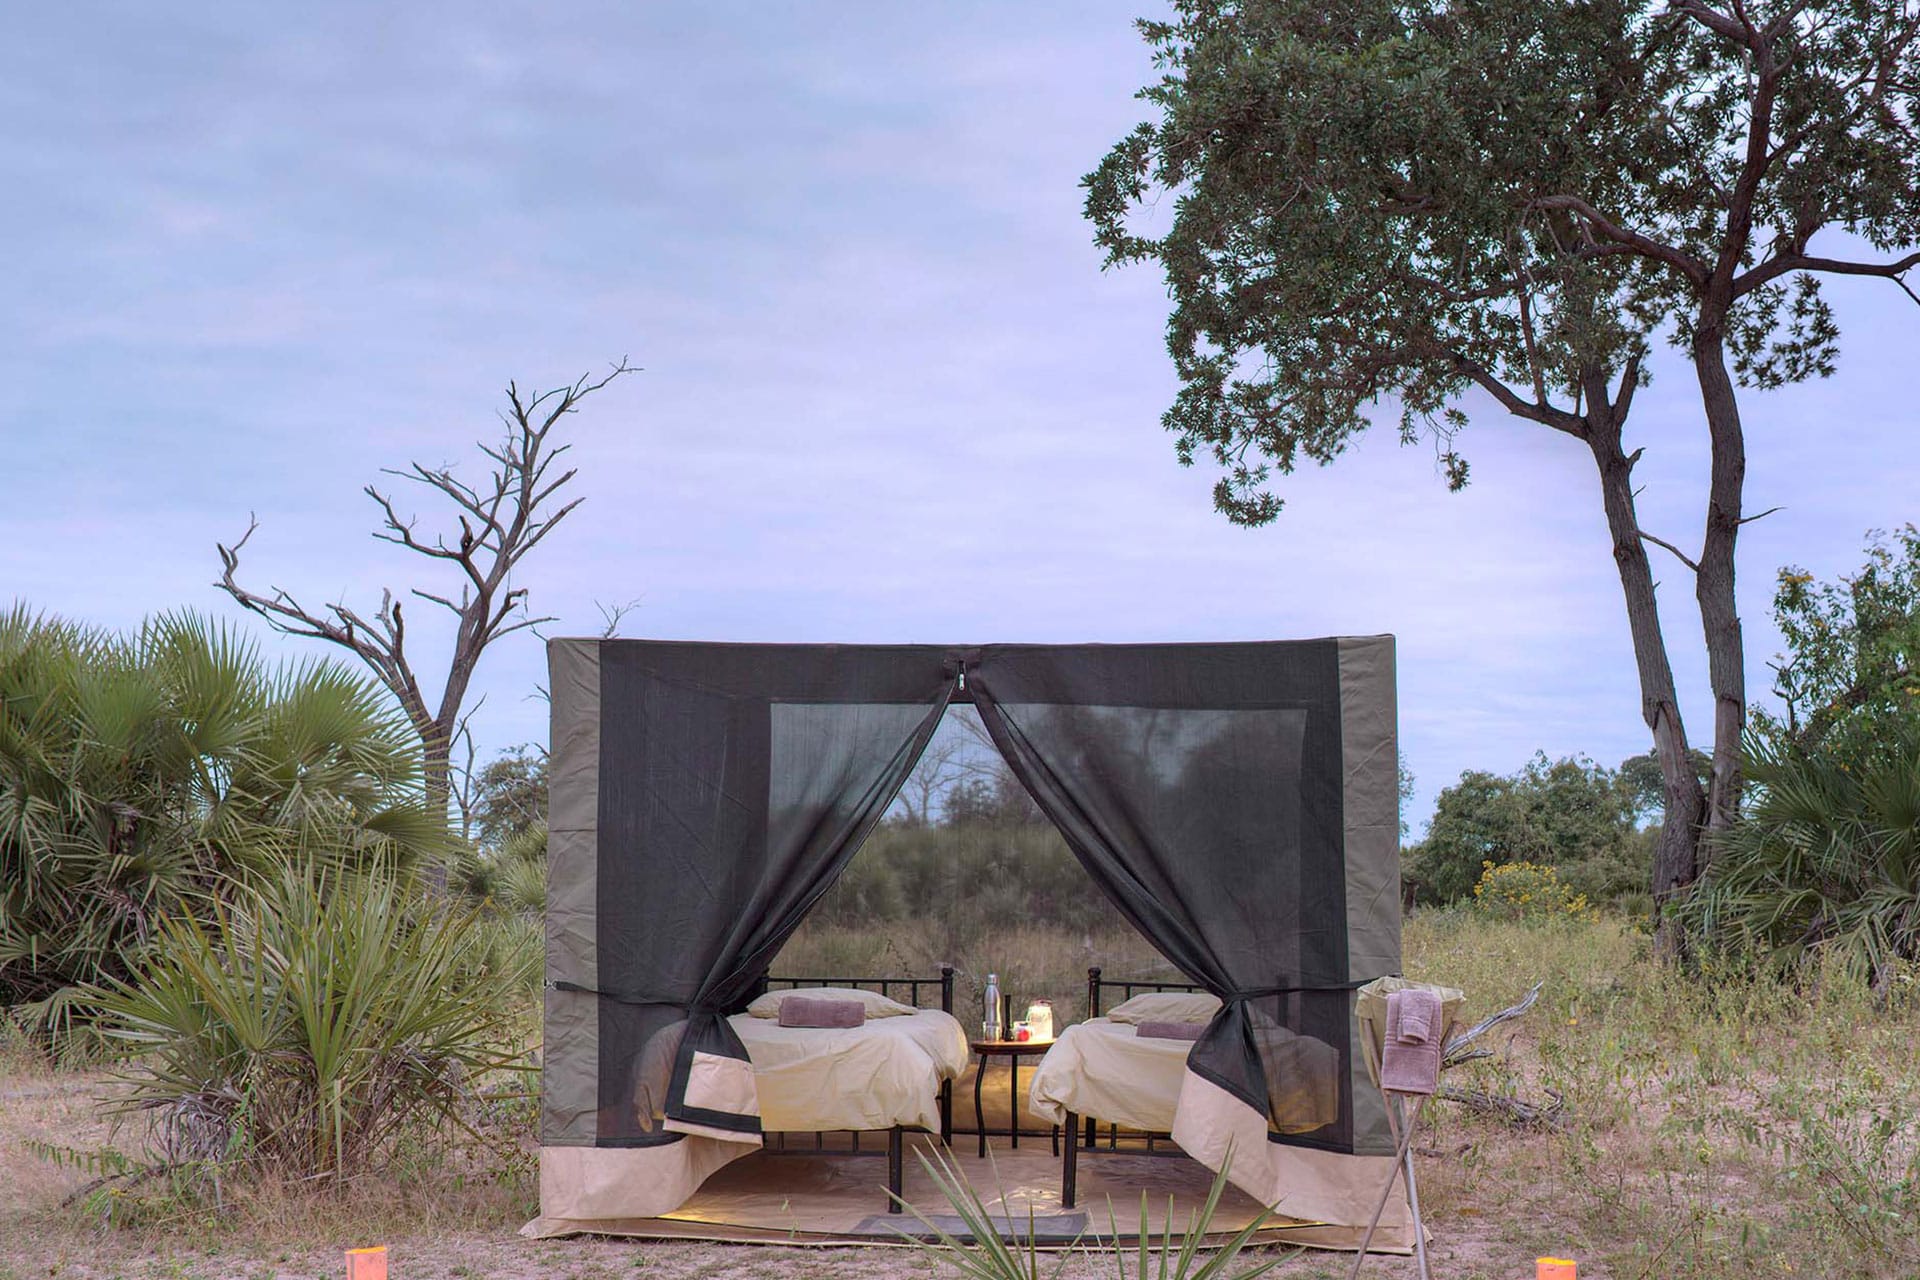 A tent sent up for fly-camping at Usanga Expedition Camp – a new luxury lodge in Africa opening in 2022.